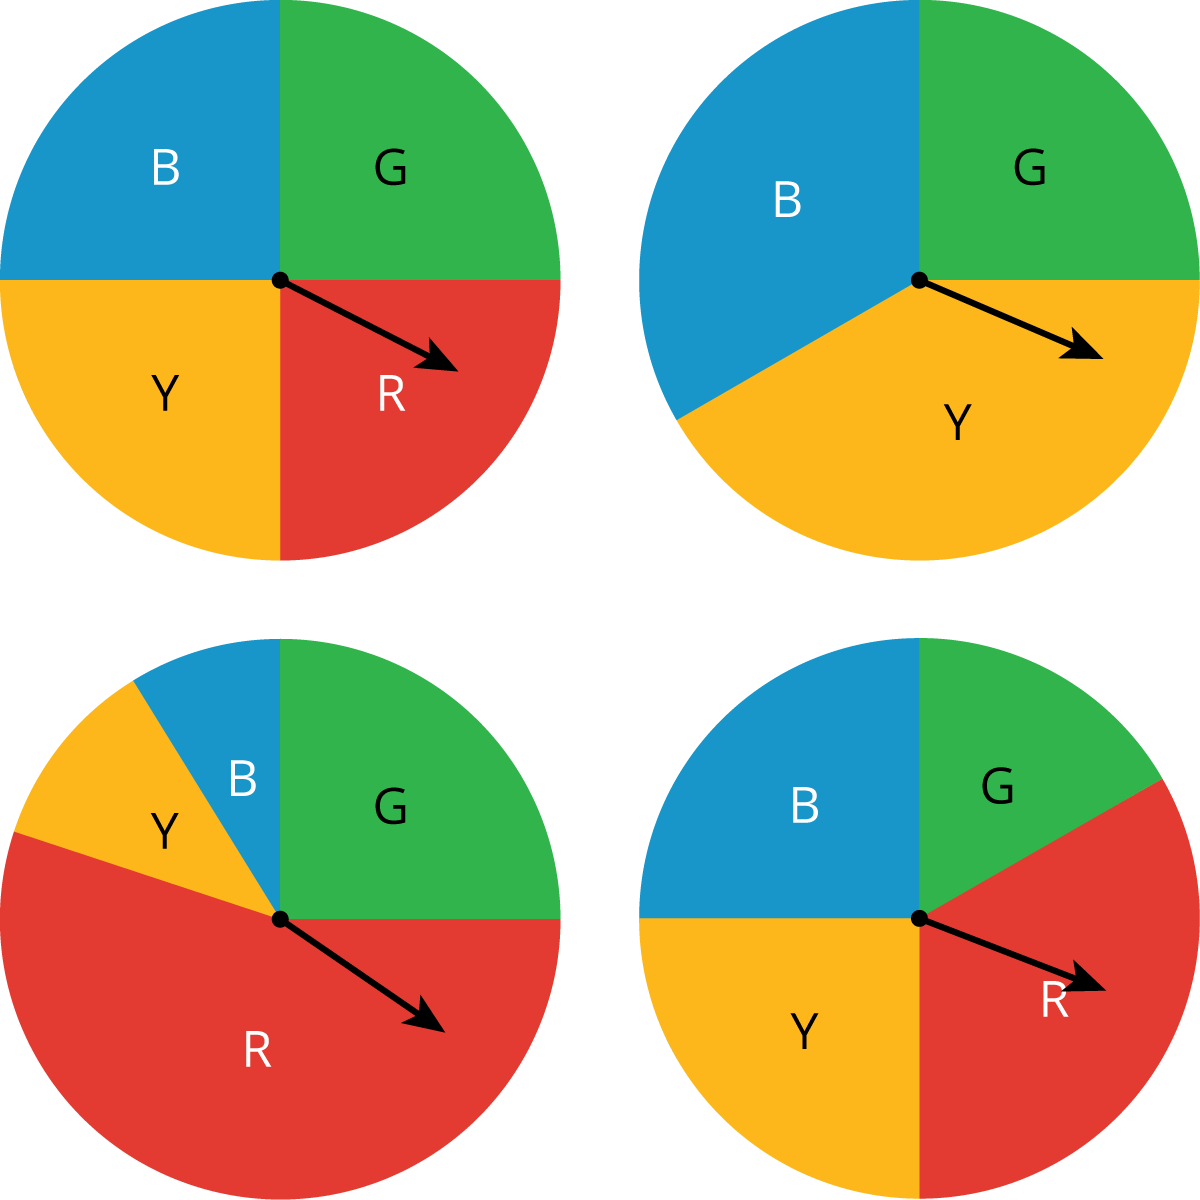 Four different circular spinners.  The top left spinner is divided into four equal parts: a blue section, labeled “B,” a green section, labeled “G,” a red section, labeled “R,” and a yellow section labeled "Y." The pointer is in the part labeled “R.”  The top right spinner is divided into three unequal parts. The first part is blue and labeled "B." It is approximately one third of the spinner. The next part is green and labeled “G.” It is approximately one fourth of the spinner. The last part is yellow and is labeled “Y.” It is approximately between four tenths and five tenths of the spinner. The pointer is in the part labeled "Y."  The bottom left spinner is divided into four unequal parts. The first part is yellow and labeled "Y." It is approximately one eighth of the spinner. The next part is blue and labeled "B." It is approximately one twelfth of the spinner. The third part is green and labeled “G.” It is approximately one fourth of the spinner. The last part is red and labeled “R.” It is approximately between five-tenths and six-tenths of the spinner. The pointer is in the part labeled "R."  The bottom right spinner is divided into four unequal parts. The first part is blue and labeled "B." It is approximately one fourth of the spinner. The next part is green and labeled "G." It is approximately one sixth of the spinner. The next part is red and labeled "R." It is approximately one third of the spinner. The last part is yellow and labeled "Y." It is approximately one fourth of the spinner. The pointer is in the part labeled "R."